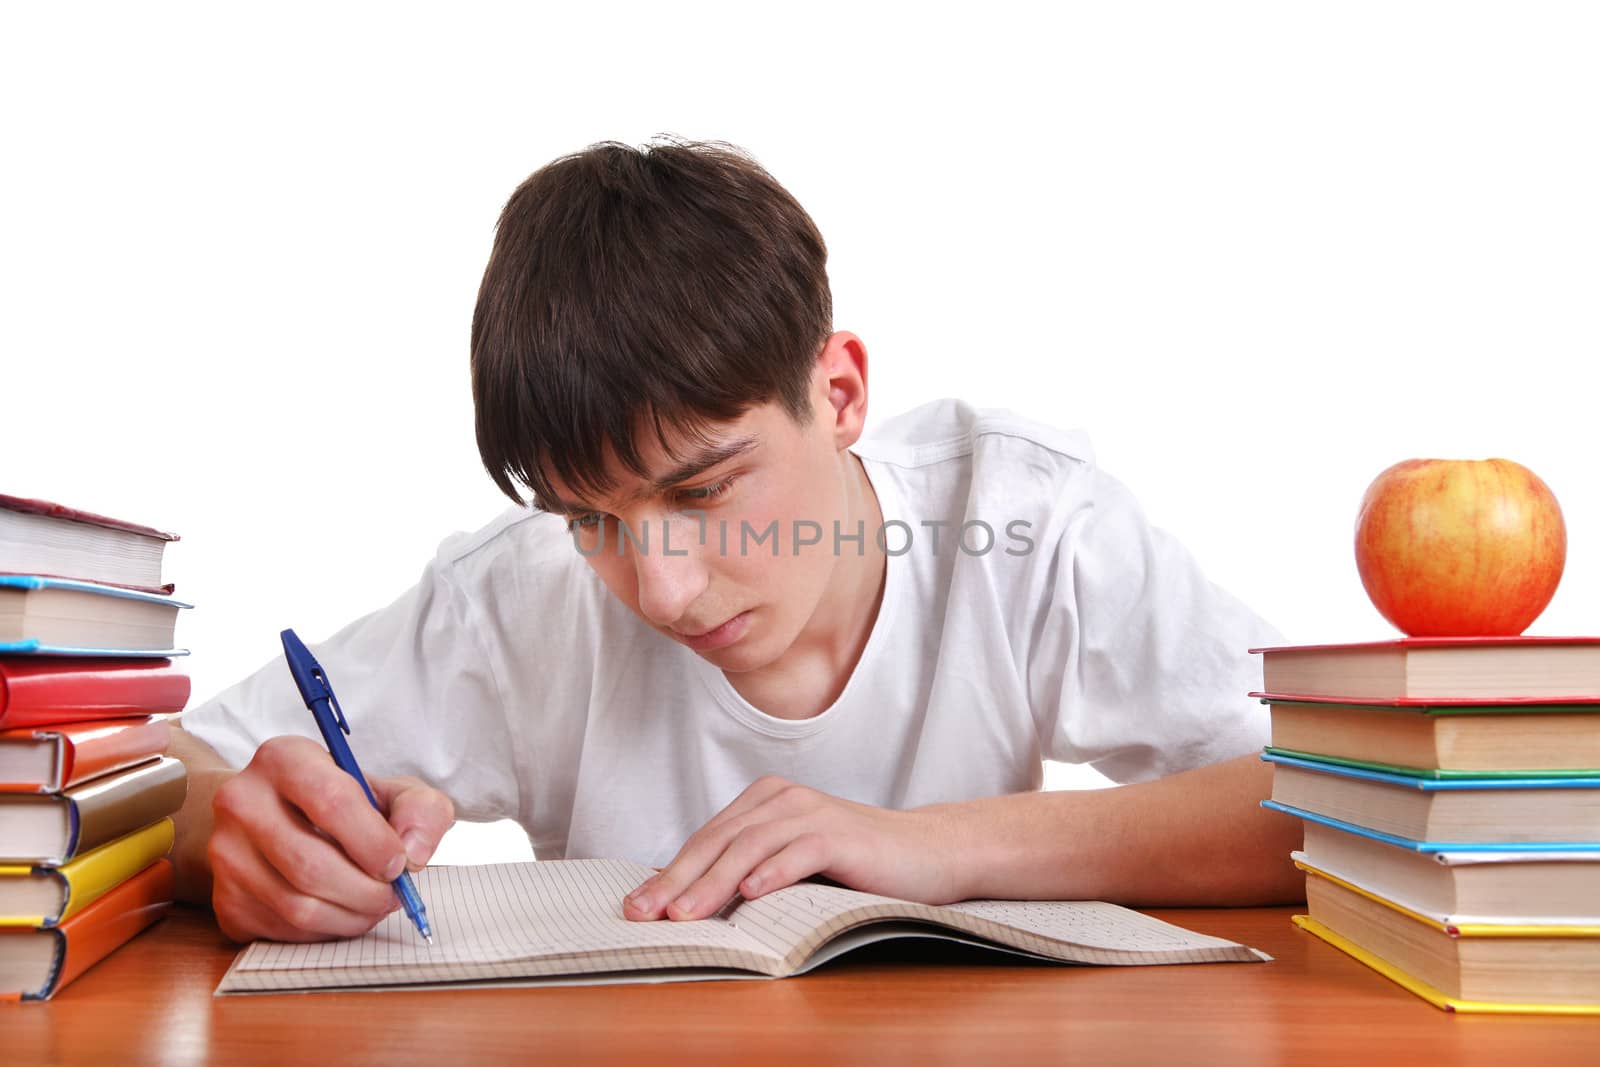 Student writing by sabphoto